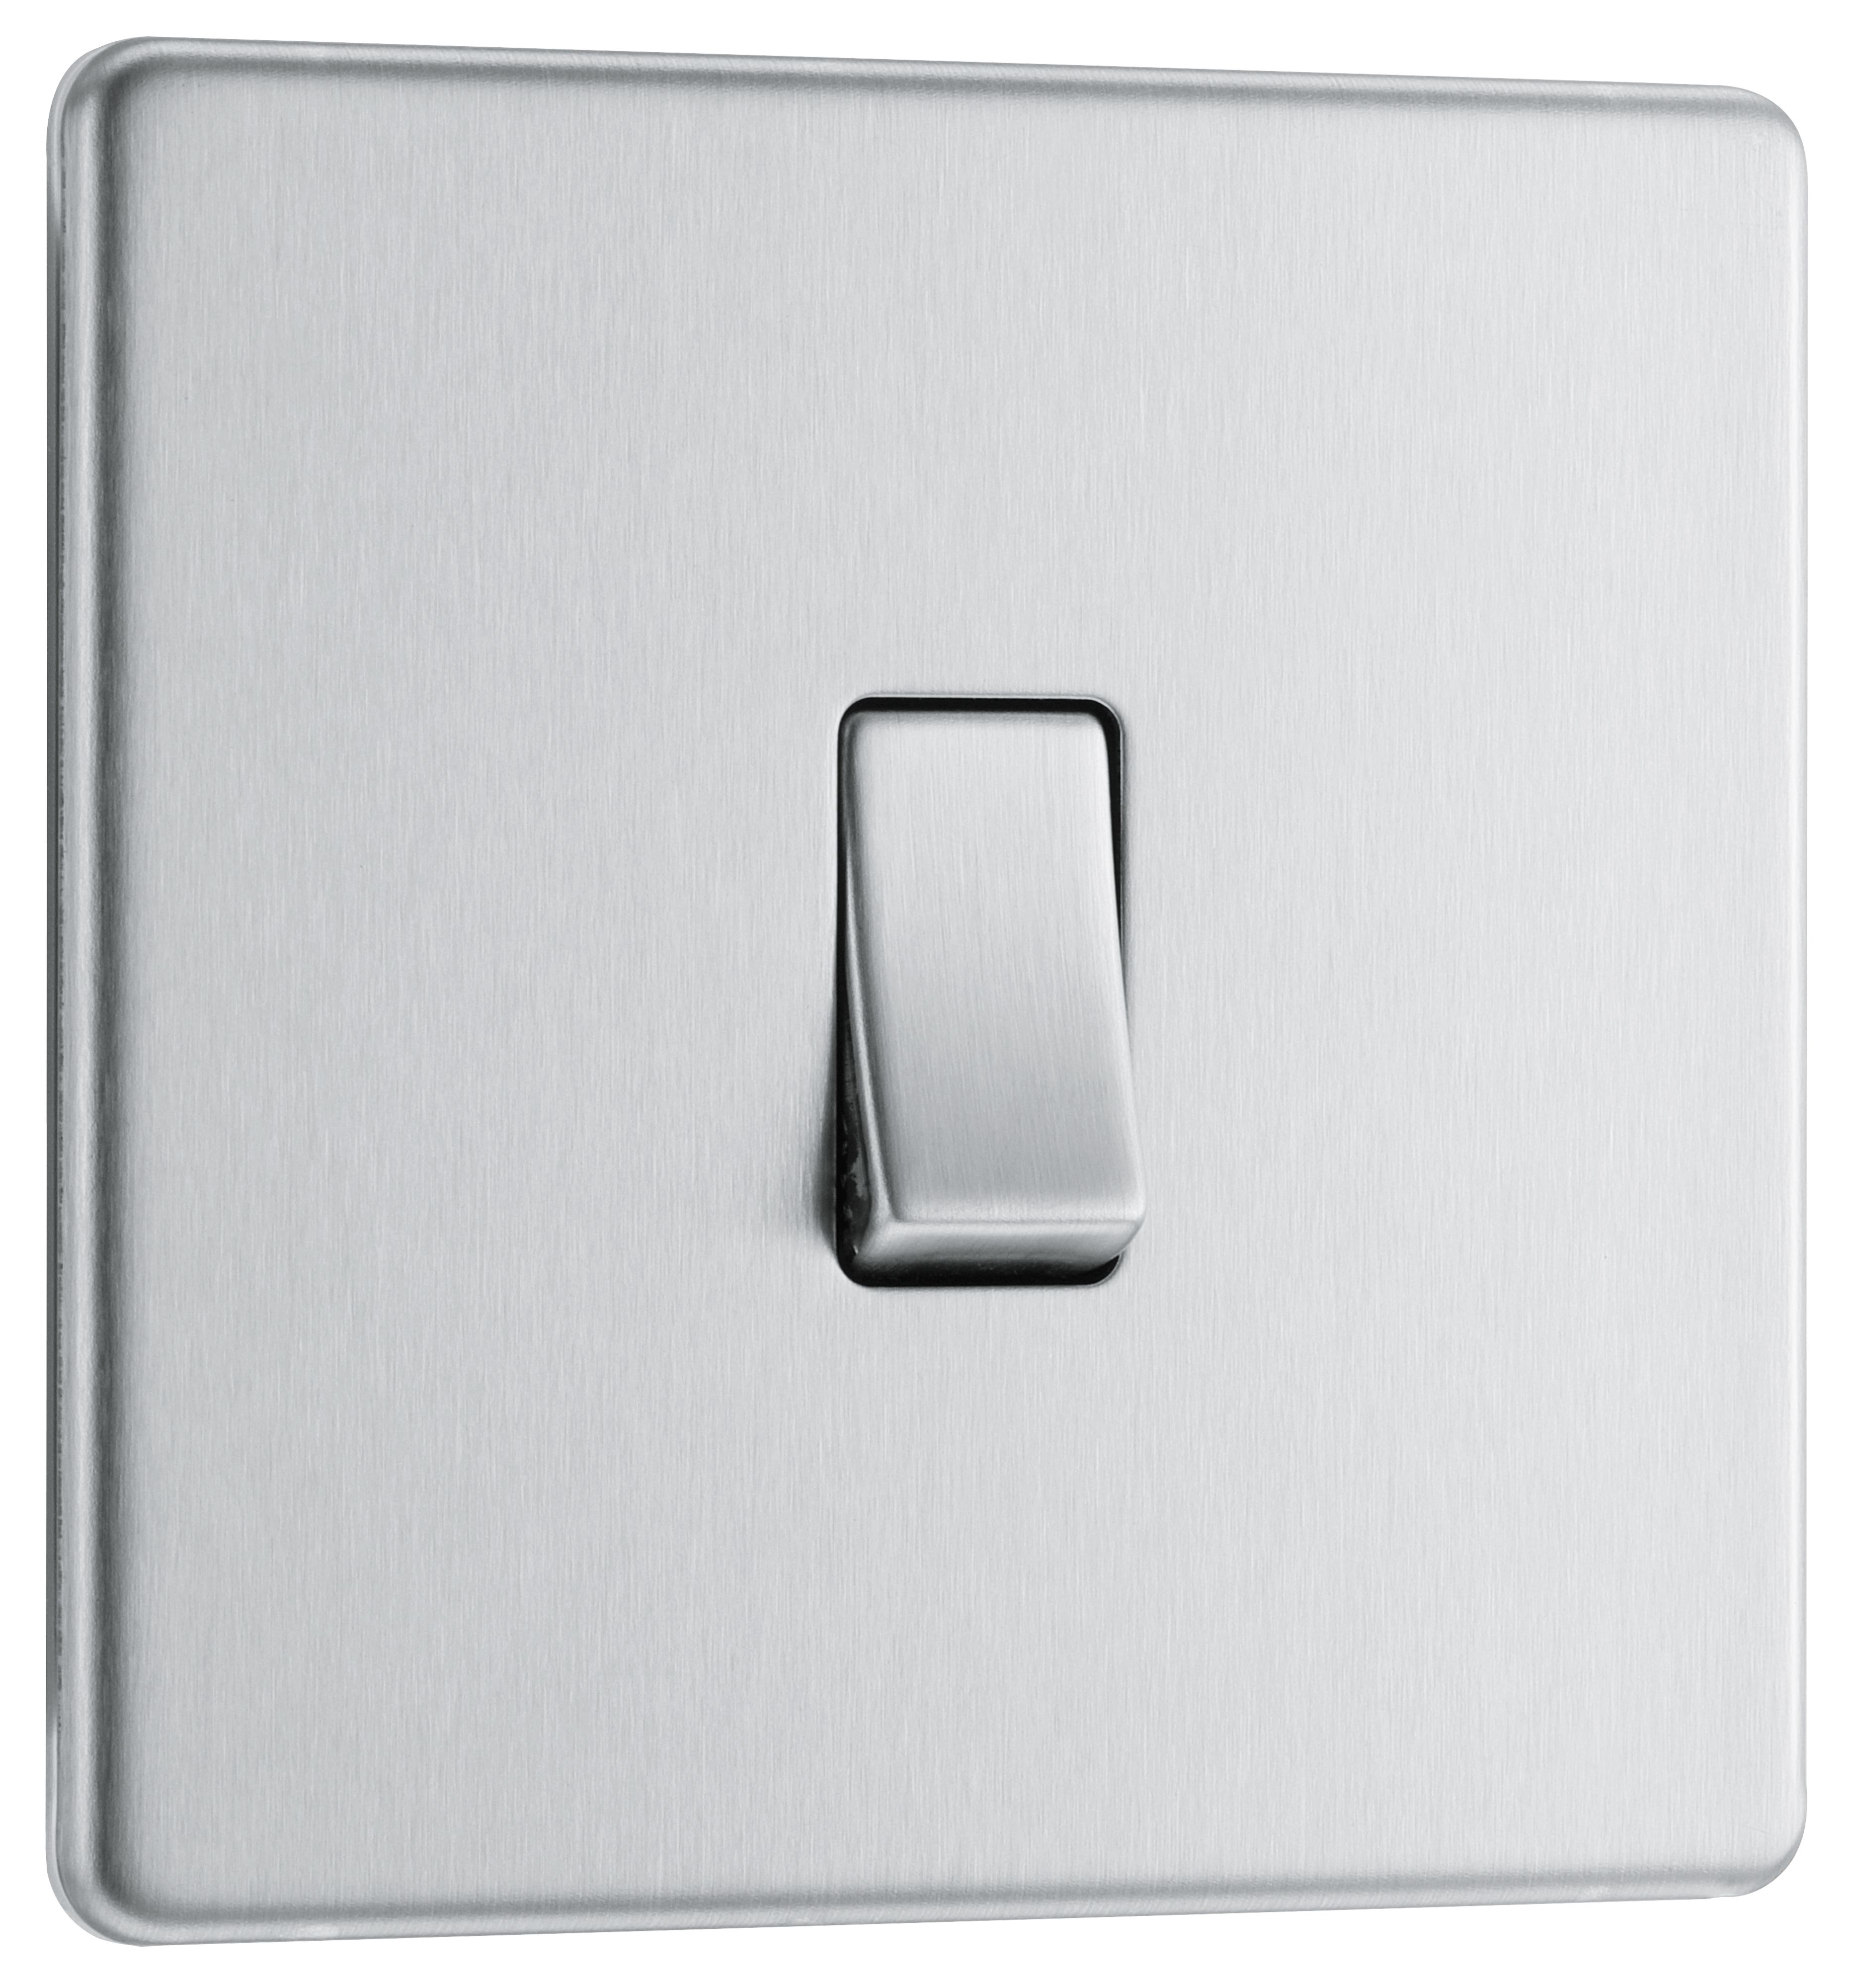 GoodHome Brushed Steel 20A 2 way 1 gang Light Screwless Switch